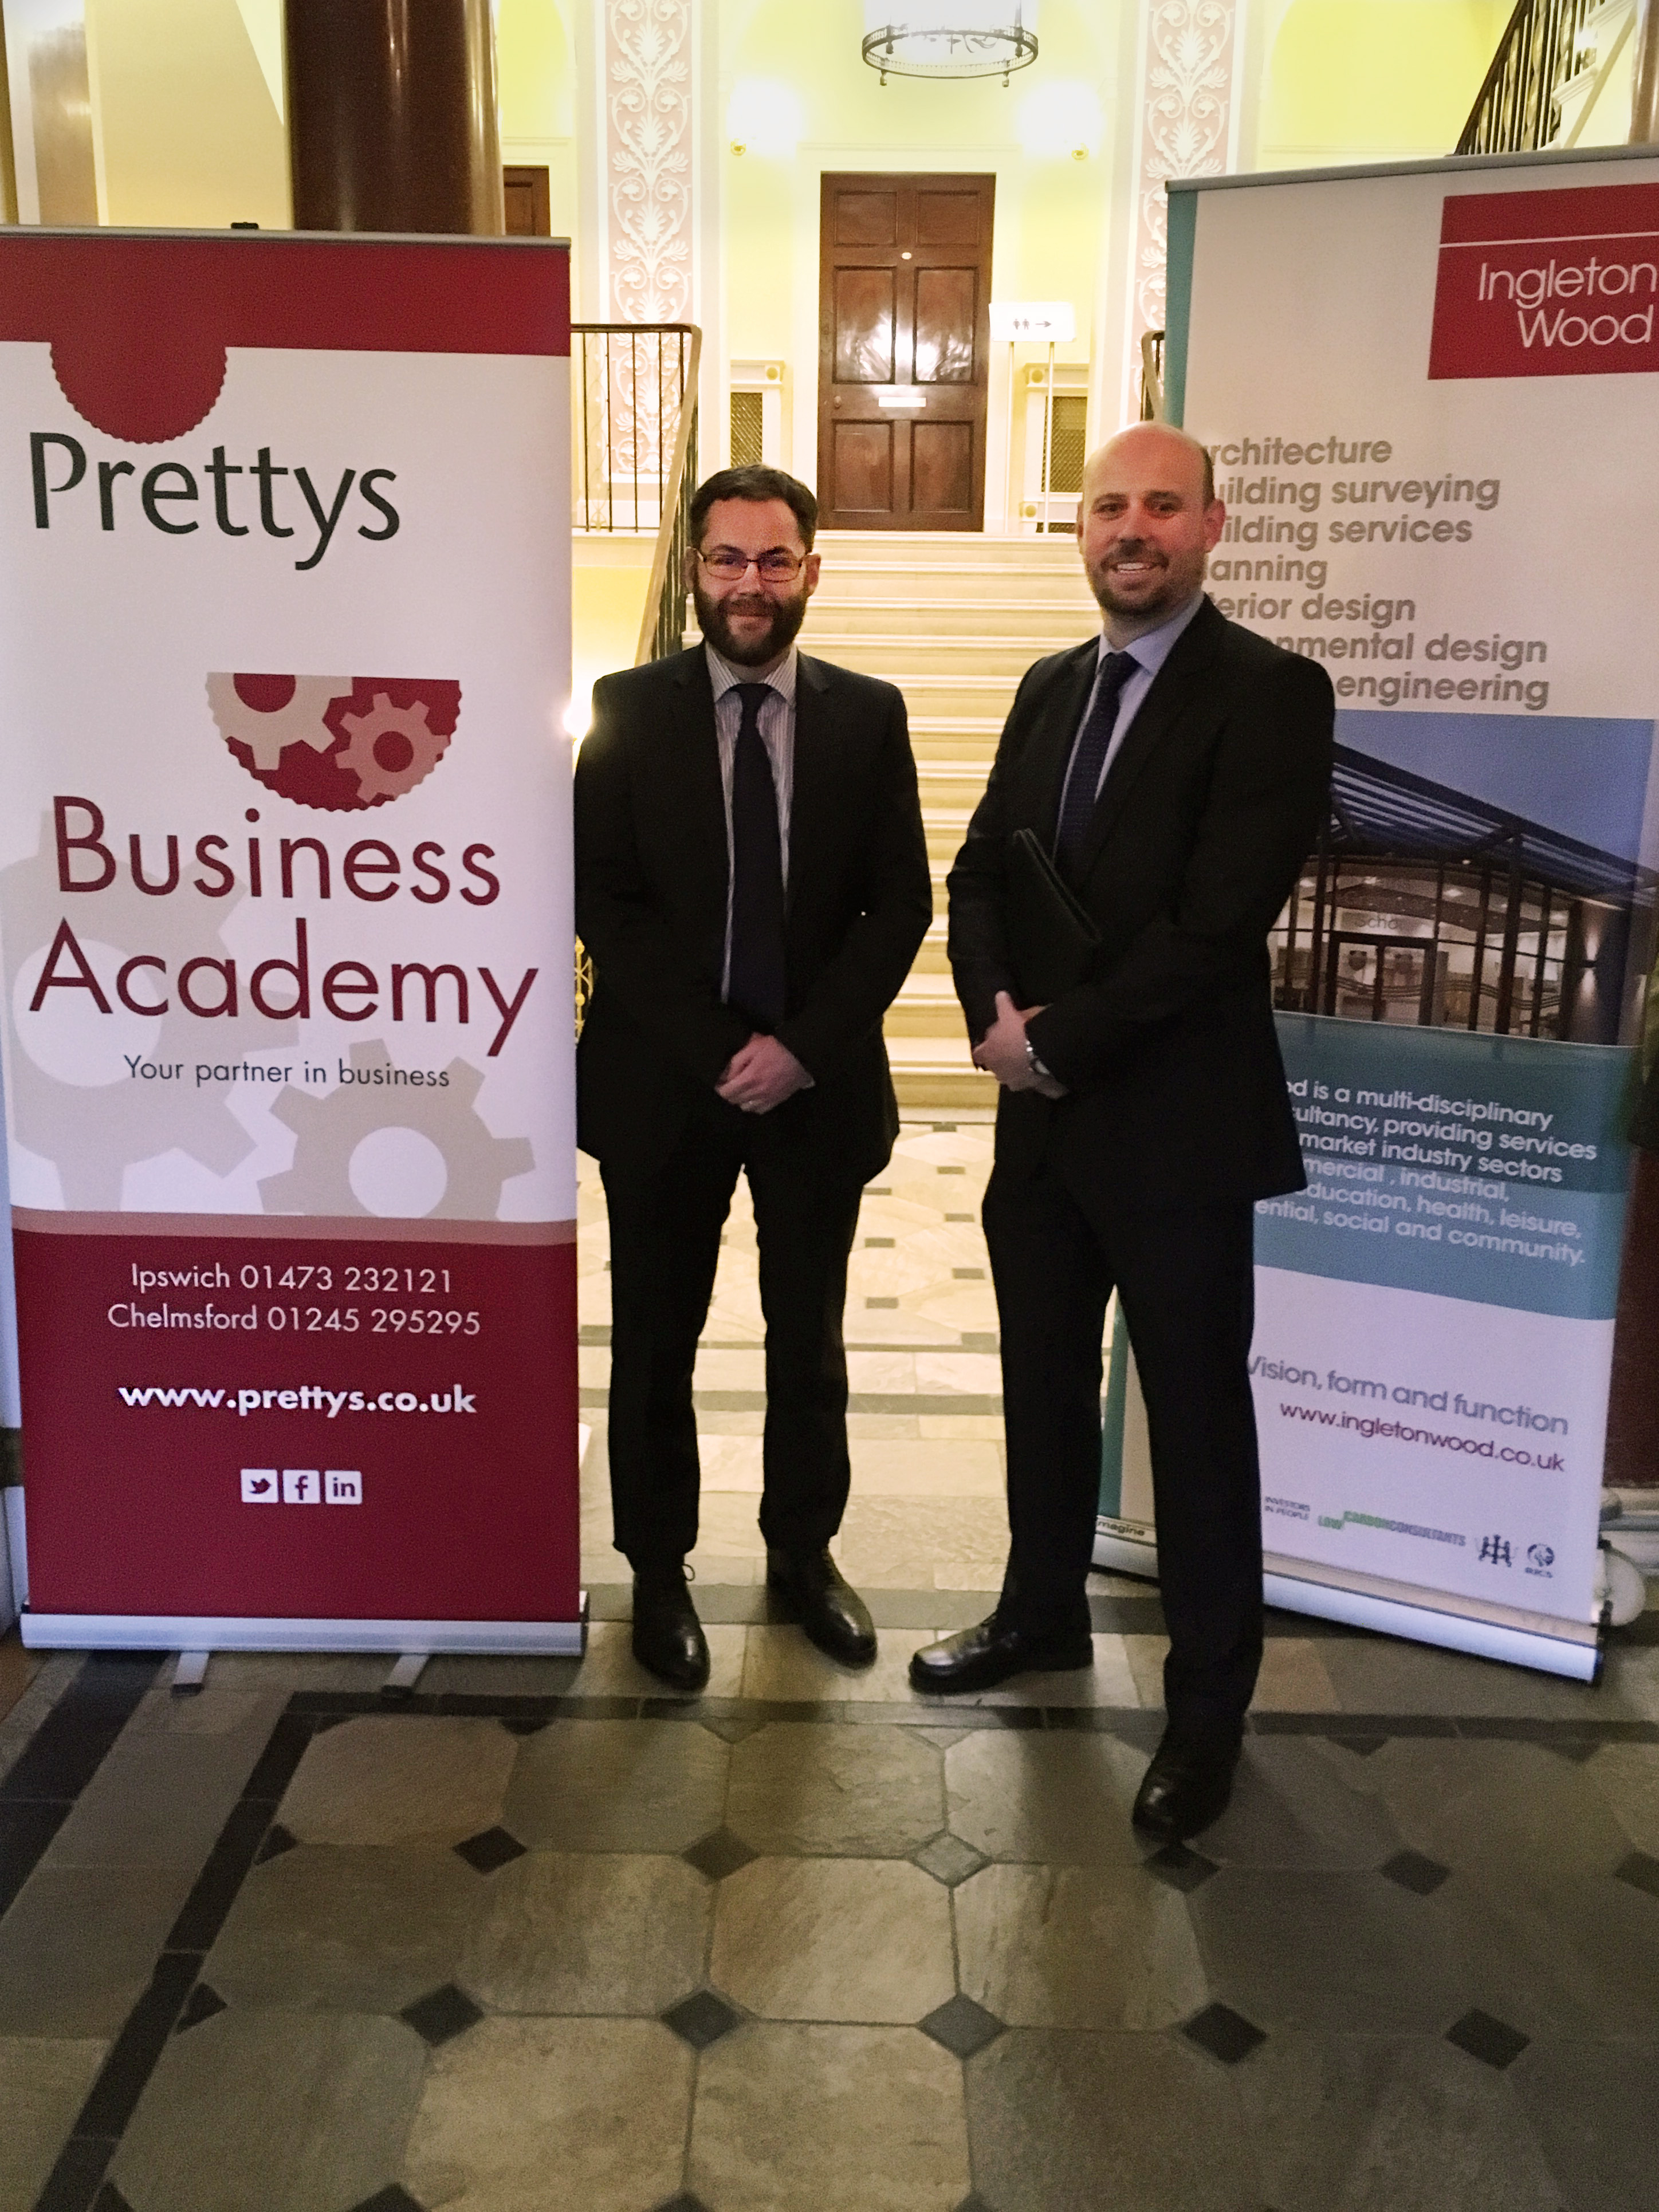 Ross Wiltshire (Prettys) and Scott Barlow (Ingleton Wood) at the Prettys Business Academy event